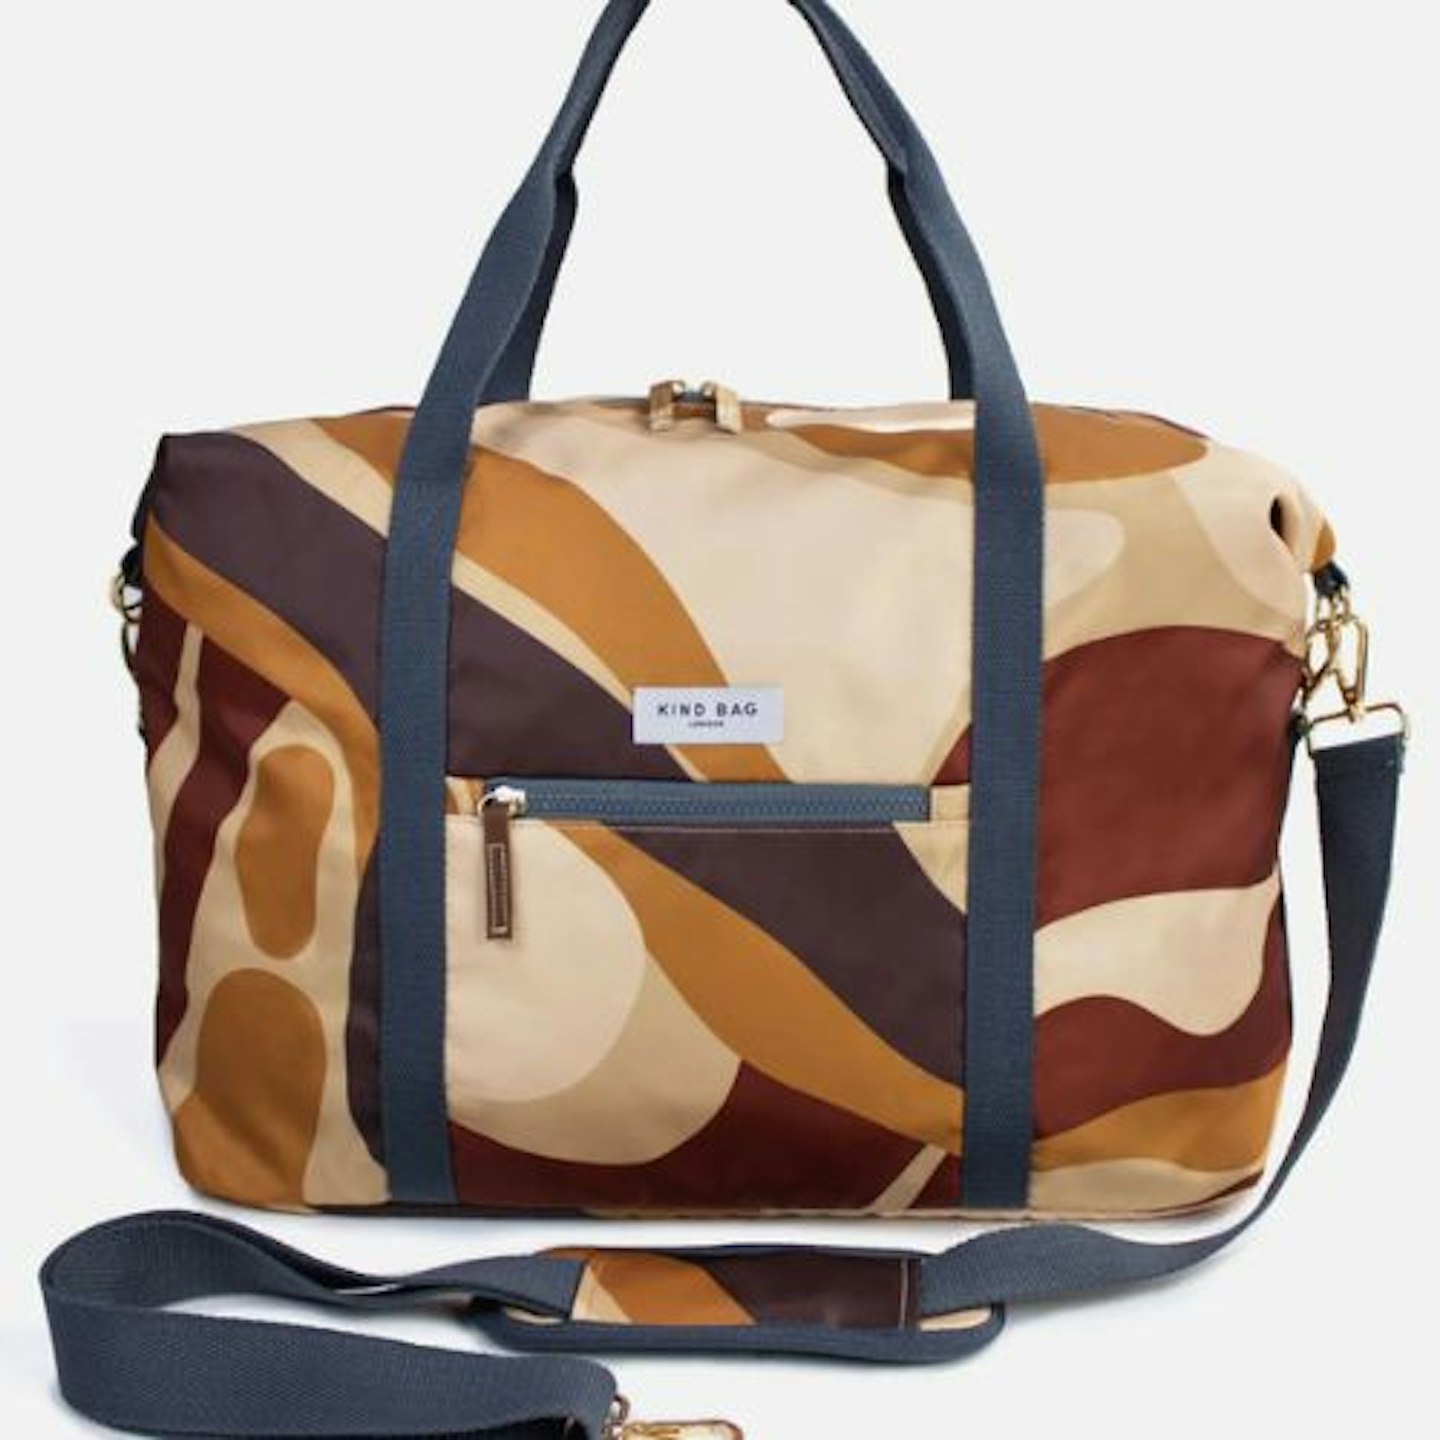 https://www.kindbag.co/collections/all/products/weekender-bag-abstract-caramel?variant=43940805312729